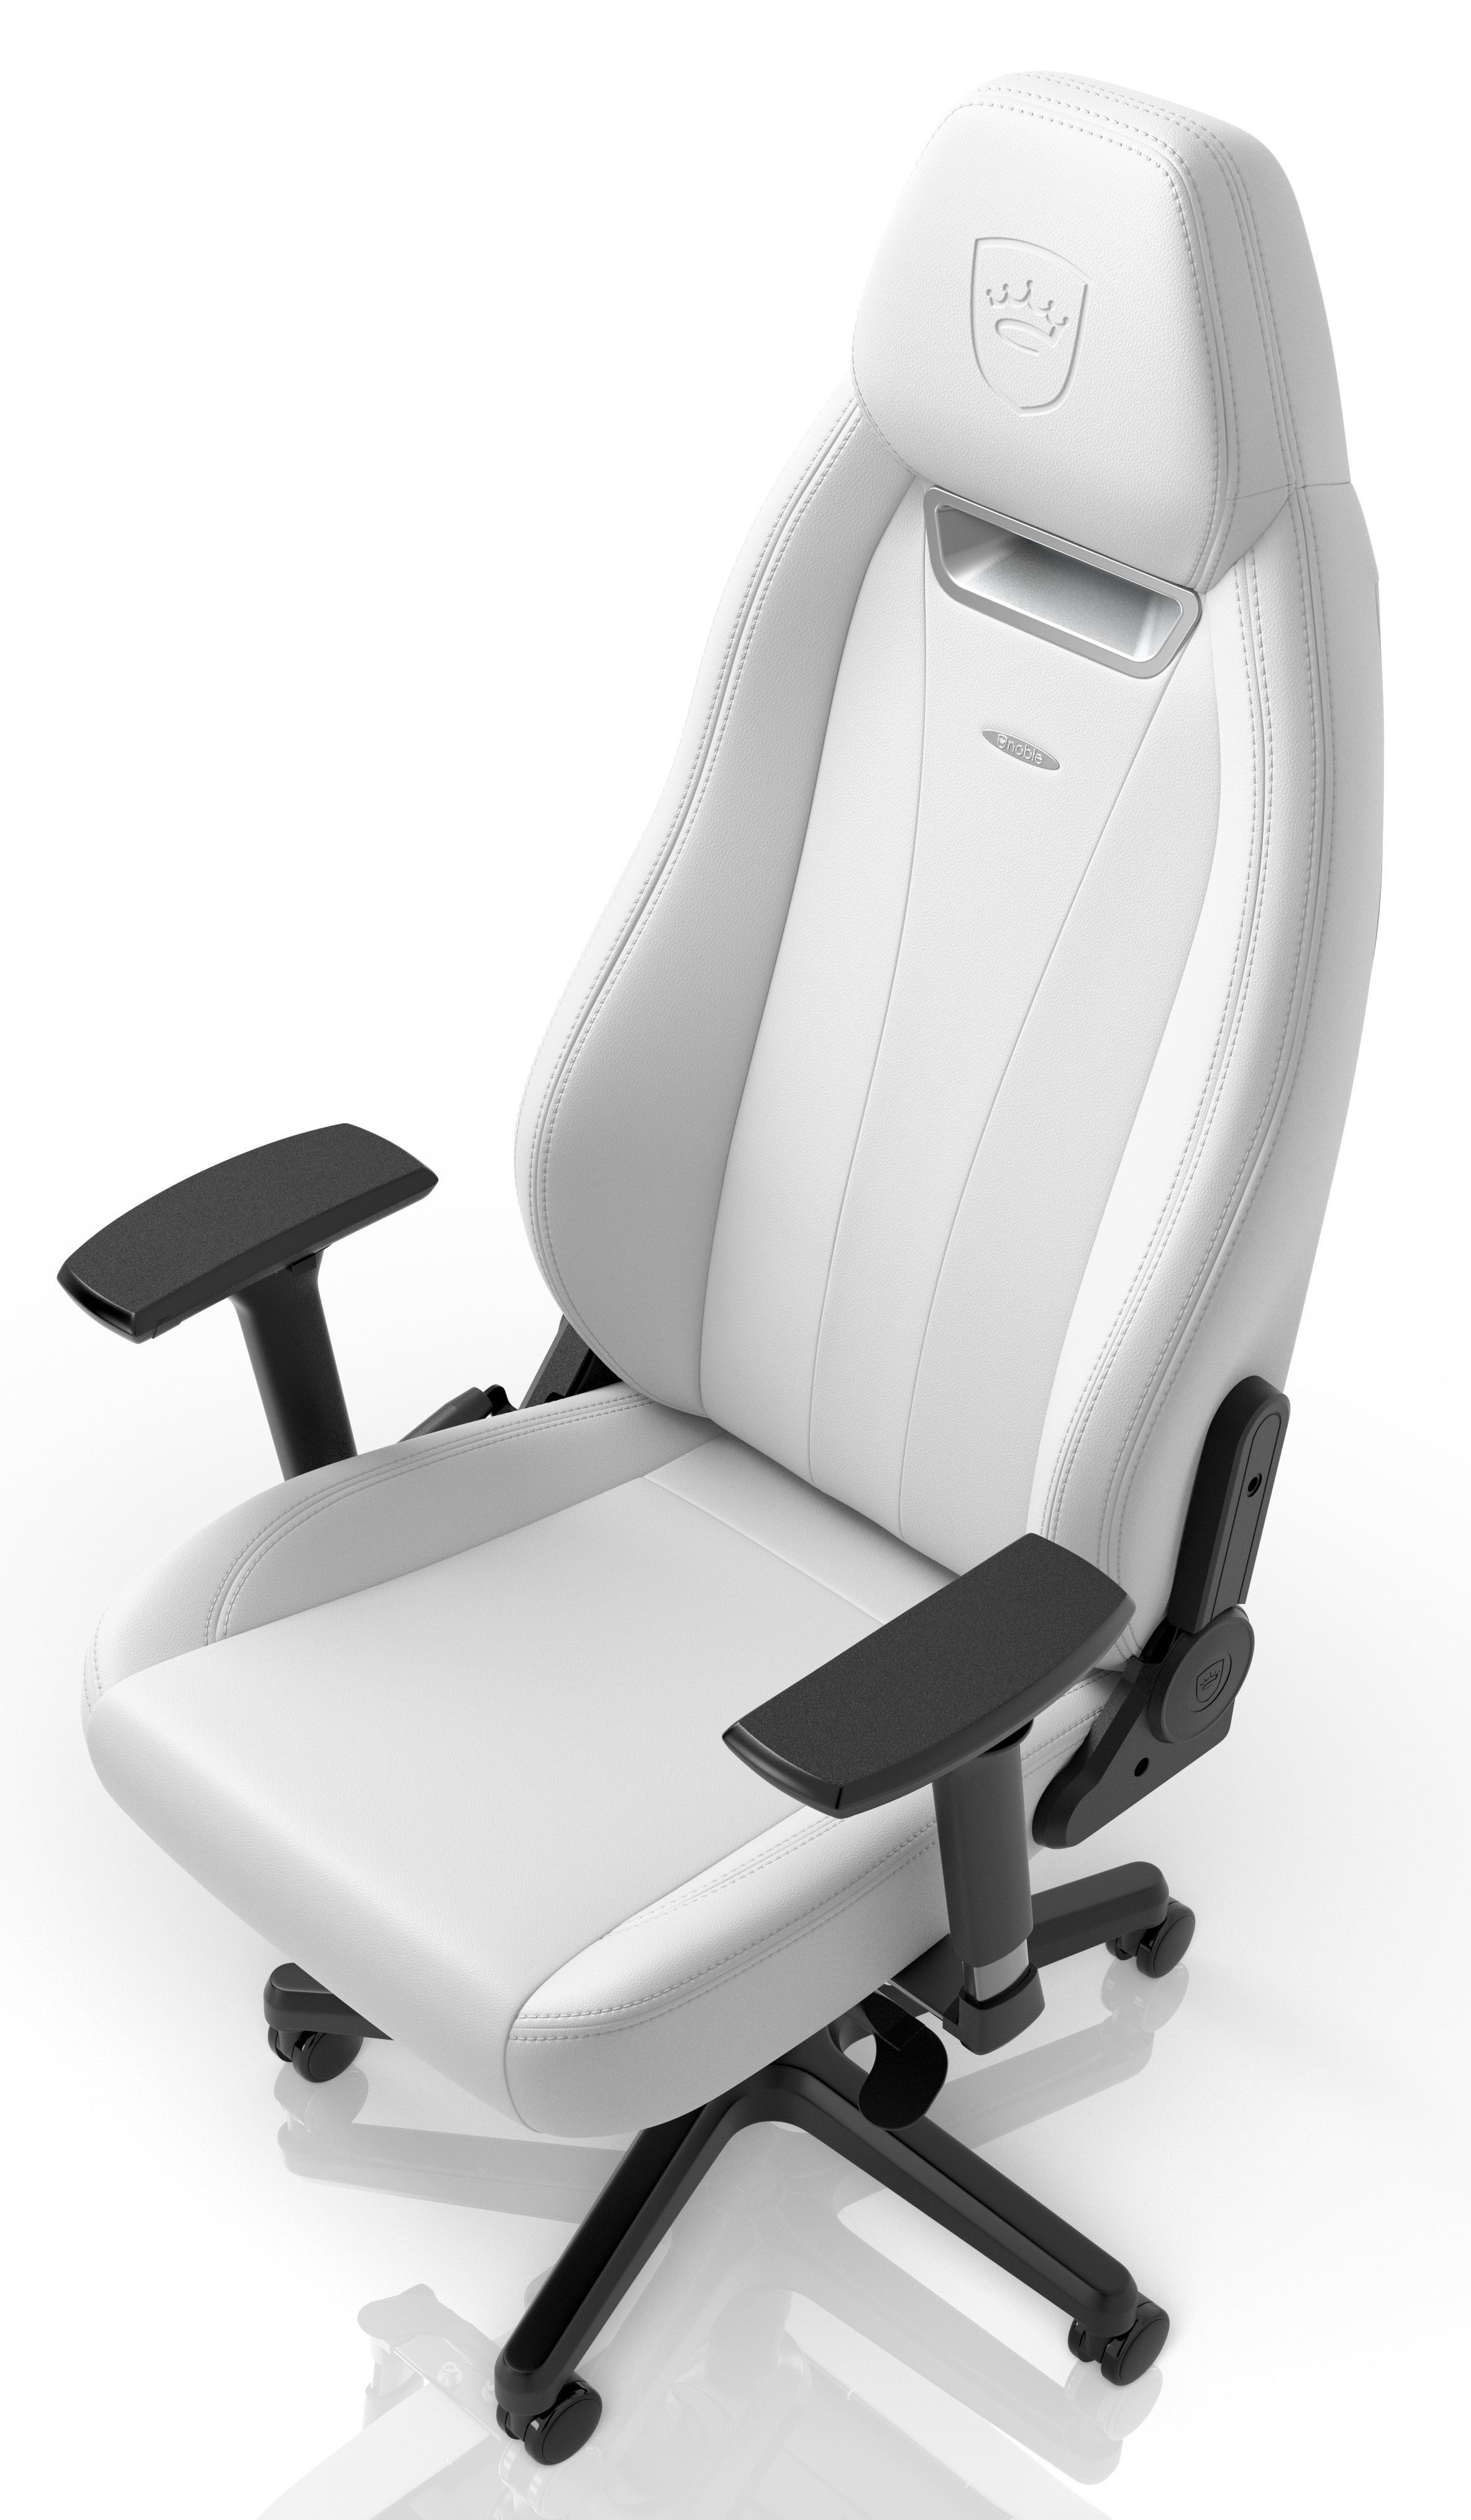 noblechairs - noblechairs LEGEND Gaming Chair White Edition – High-tech PU Leather